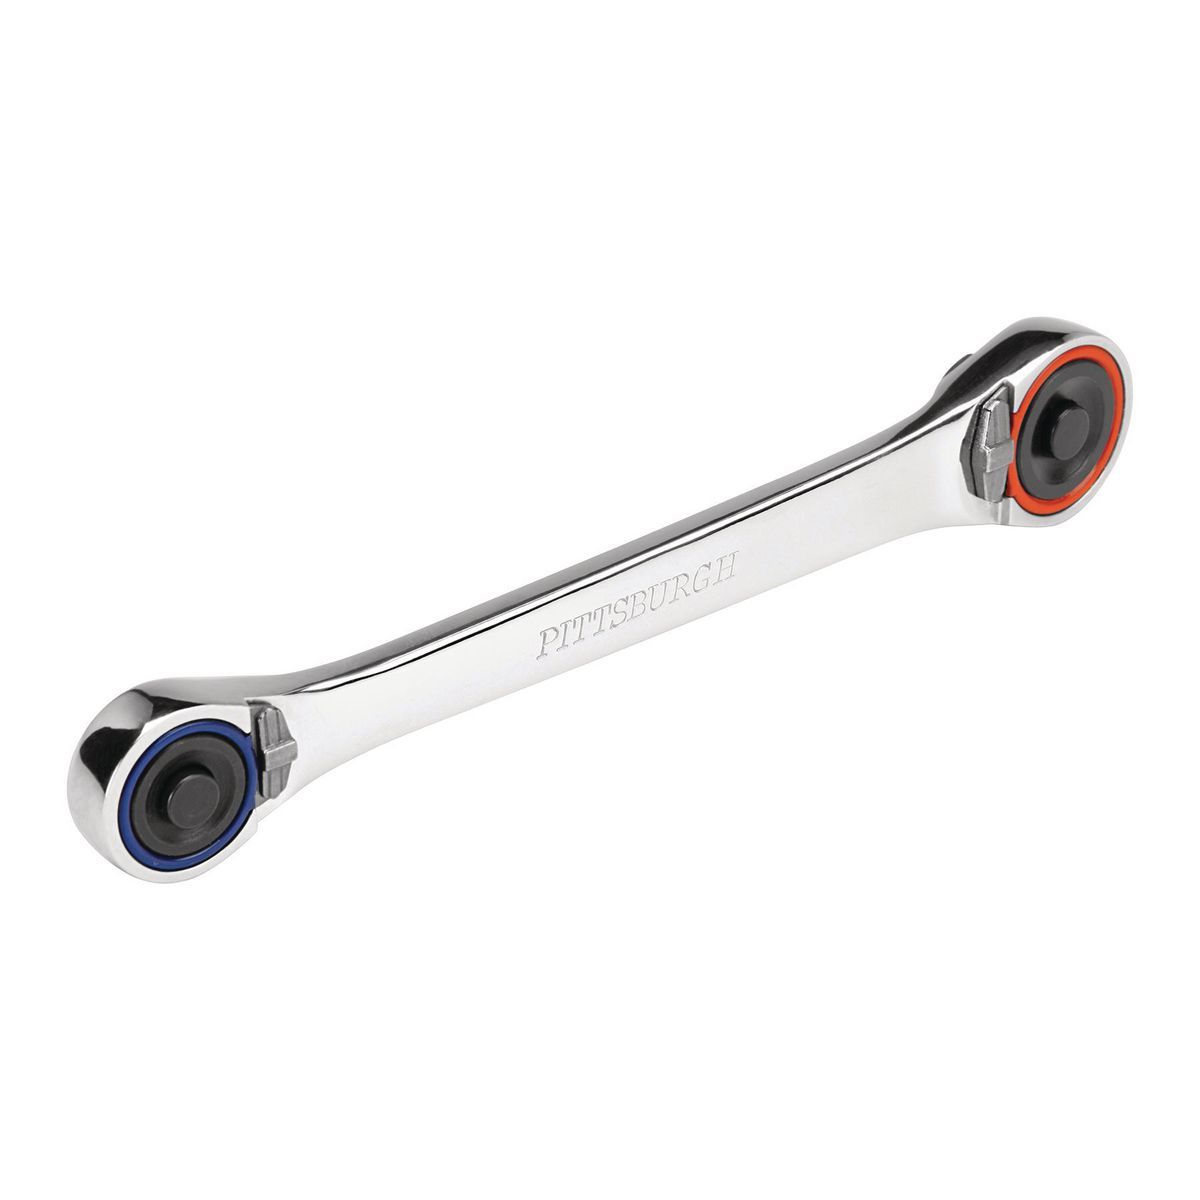 PITTSBURGH PRO 1/4 in, 3/8 in. Drive Dual Head Ratchet